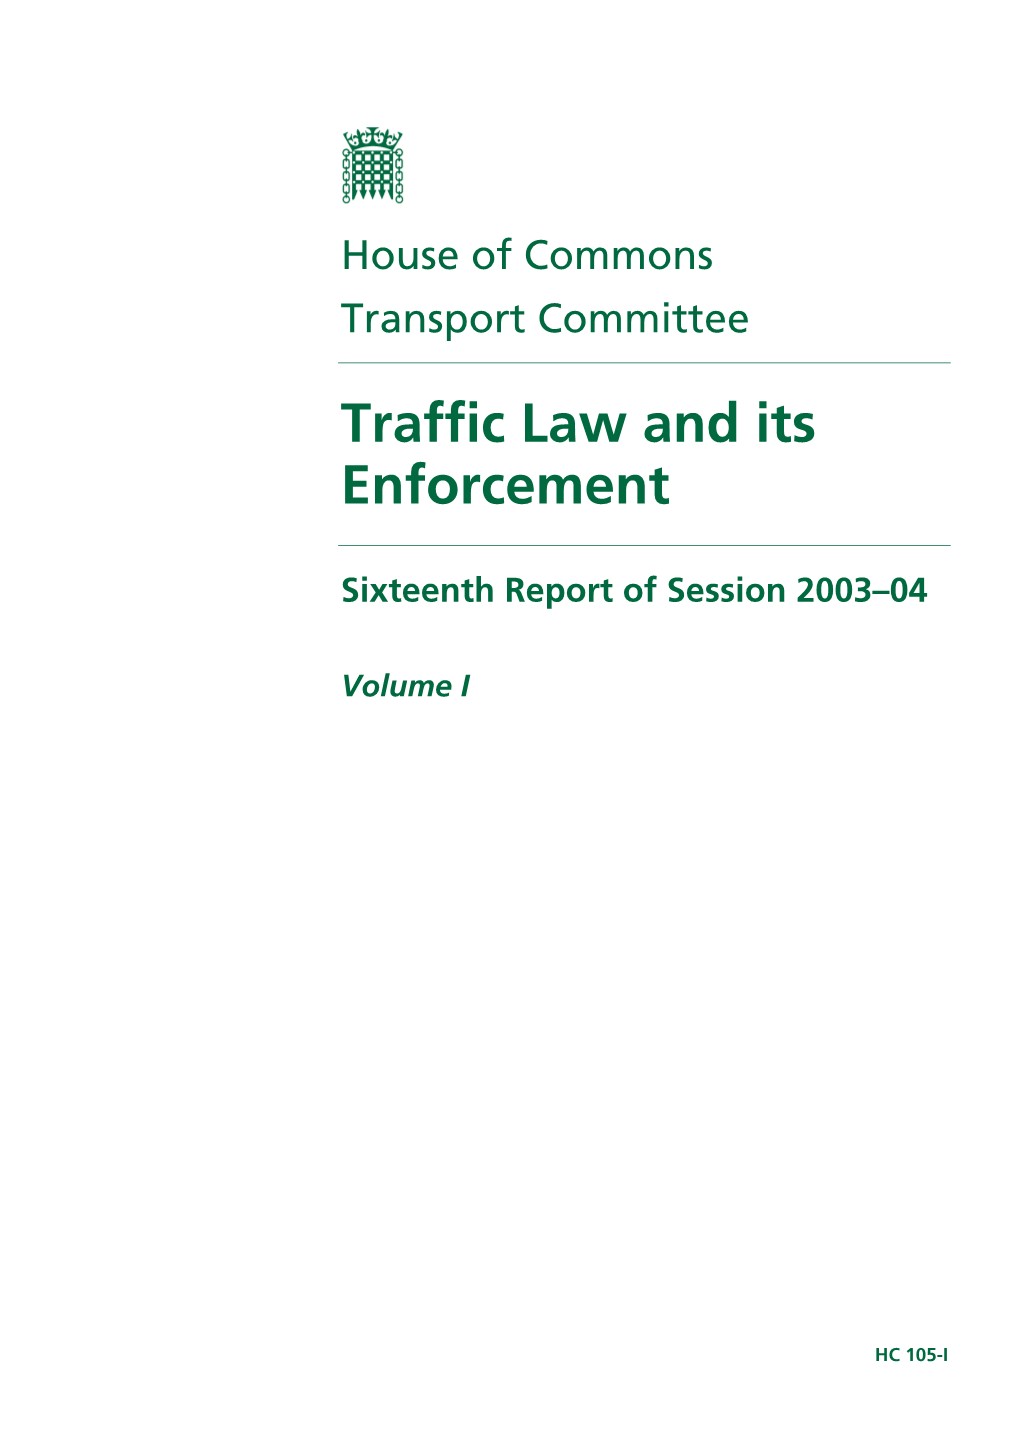 Traffic Law and Its Enforcement